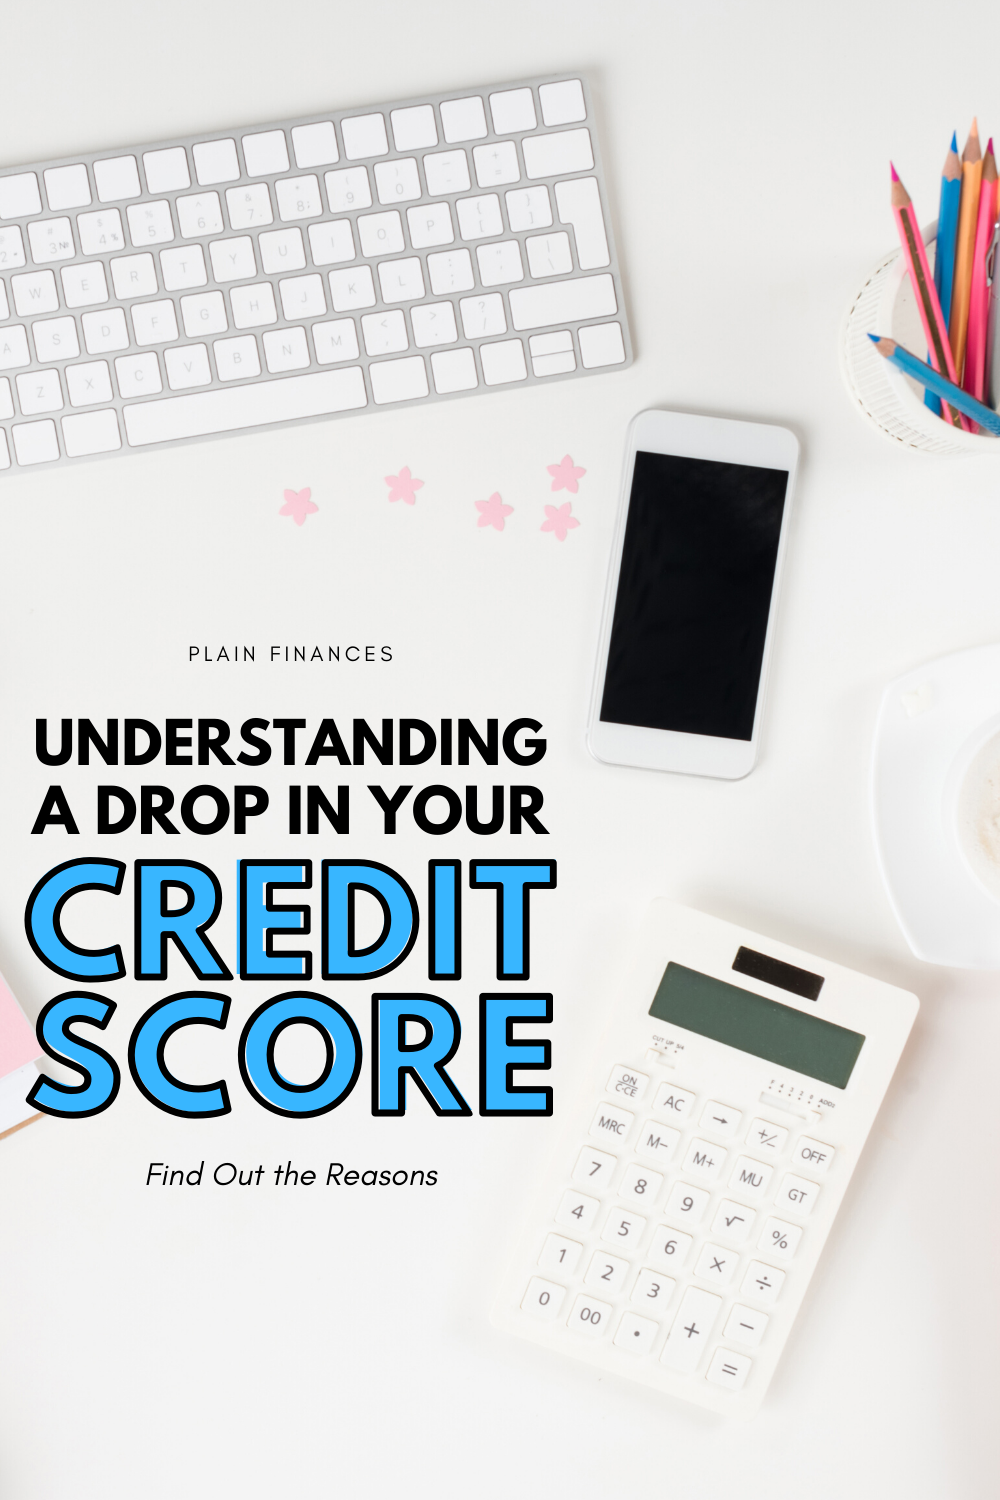 Why Did My Credit Score Drop: Find Out the Reasons in 2020 ...